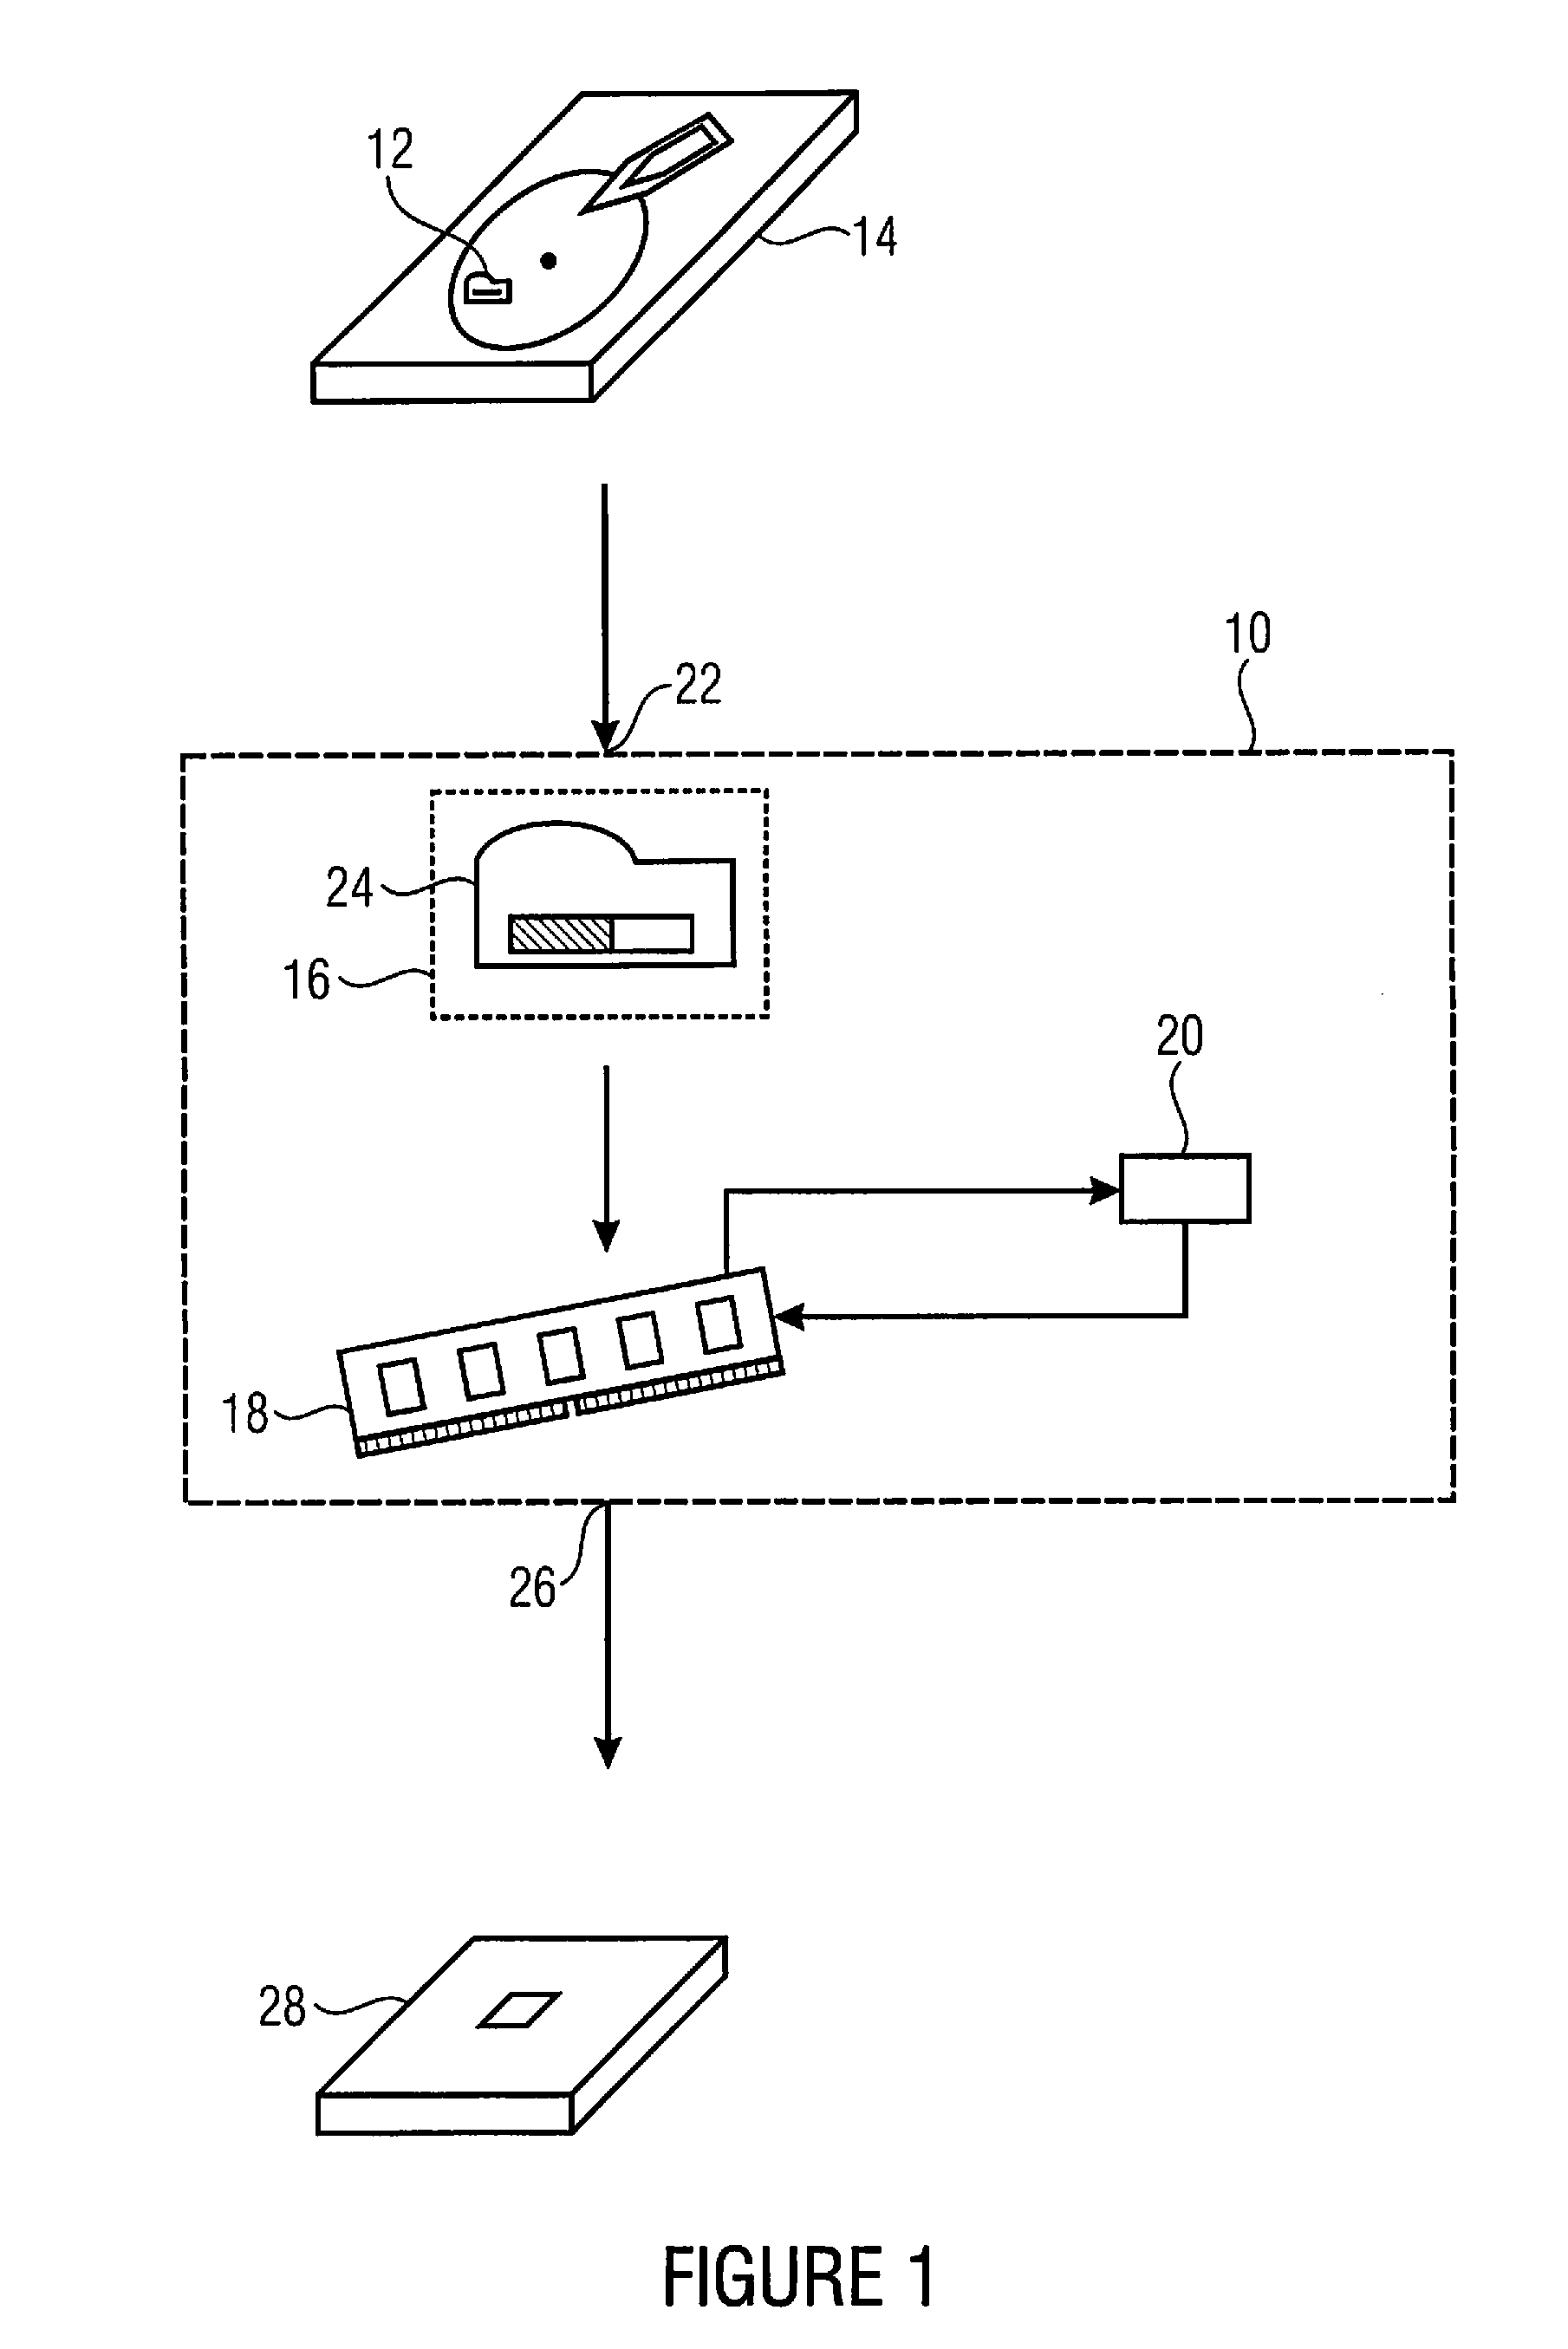 Cache device for caching